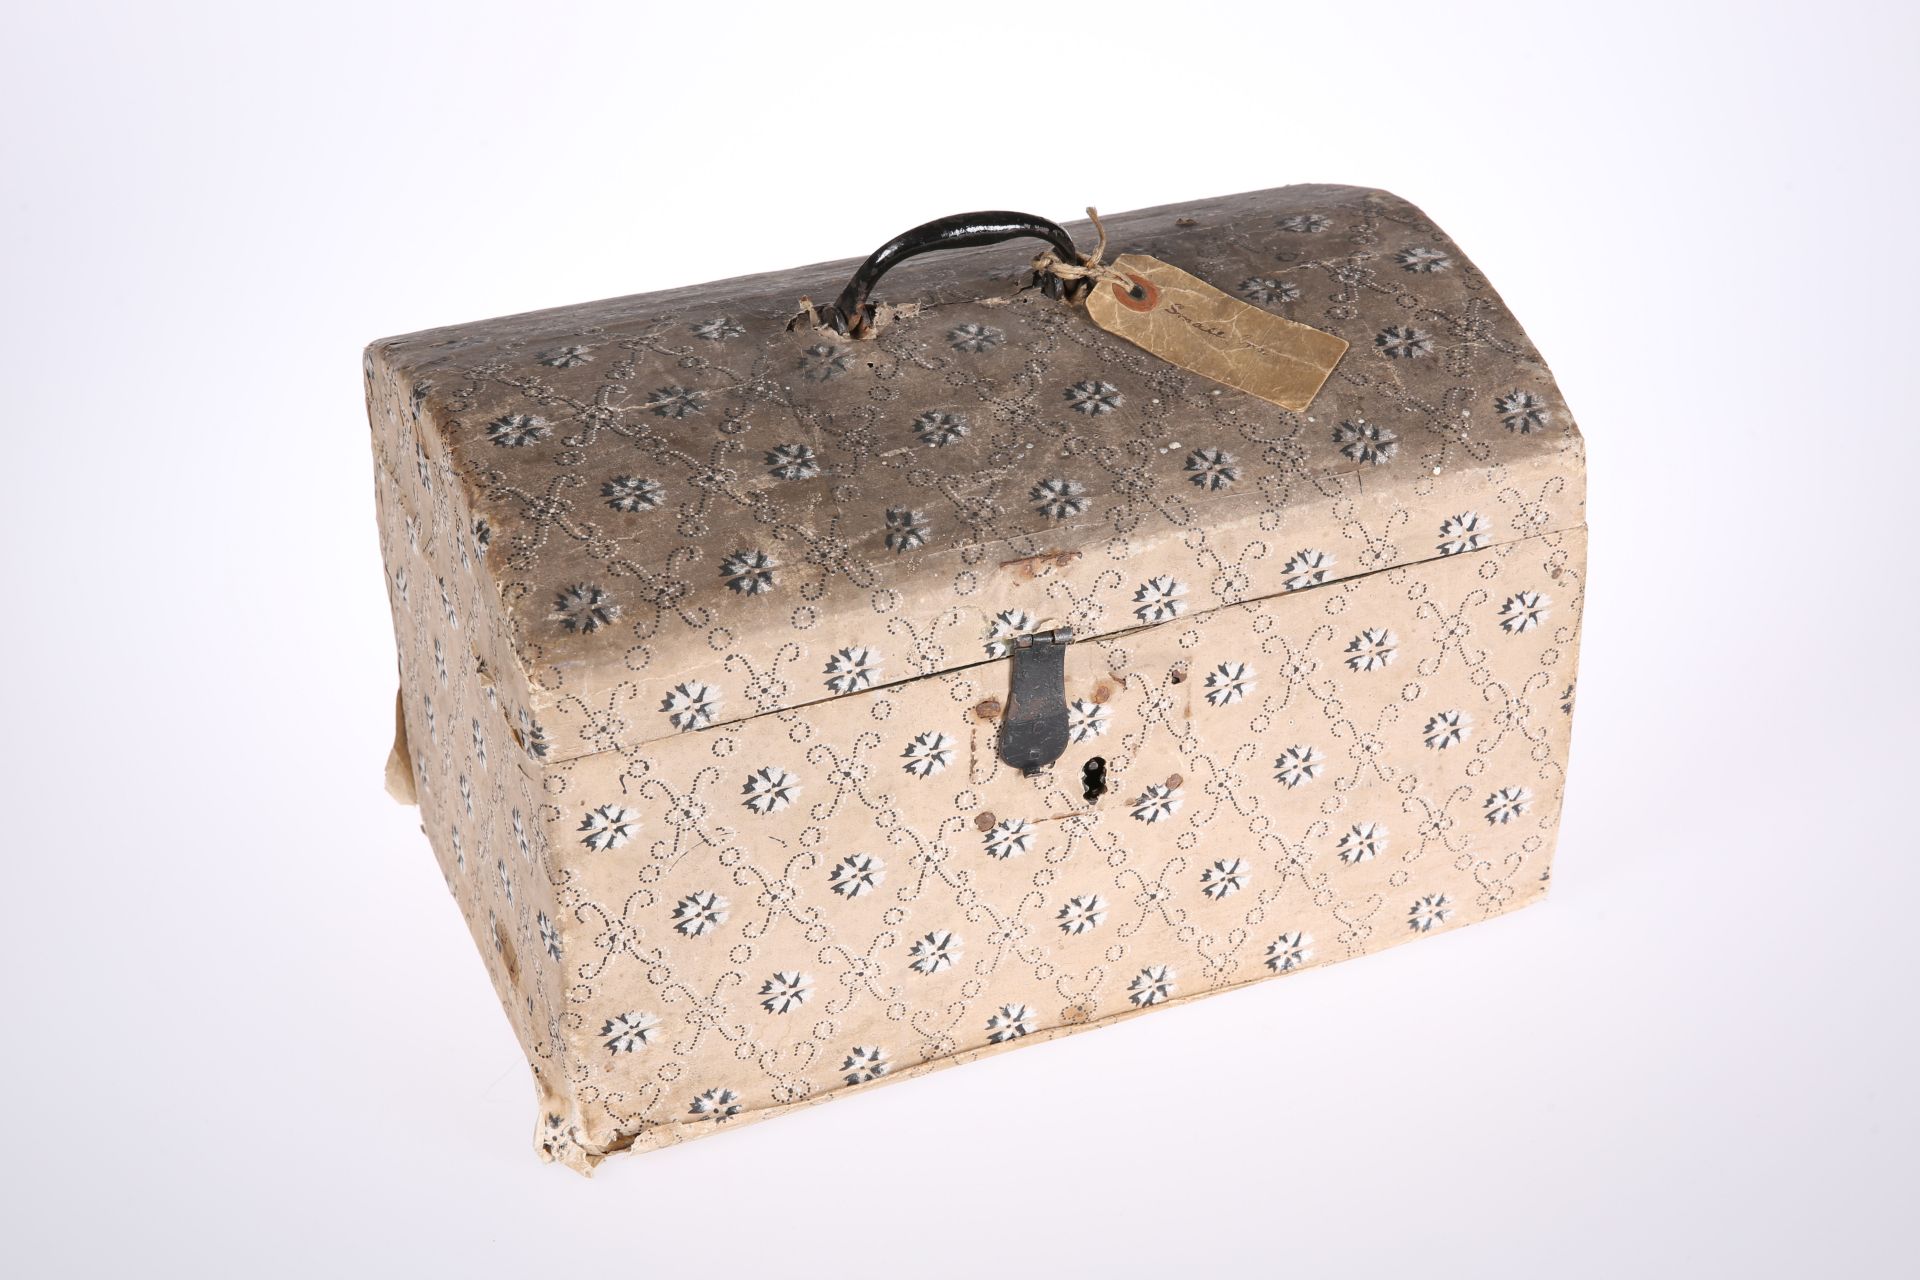 A DOME-TOP WALLPAPER BOX, EARLY 19th CENTURY, PROBABLY AMERICAN